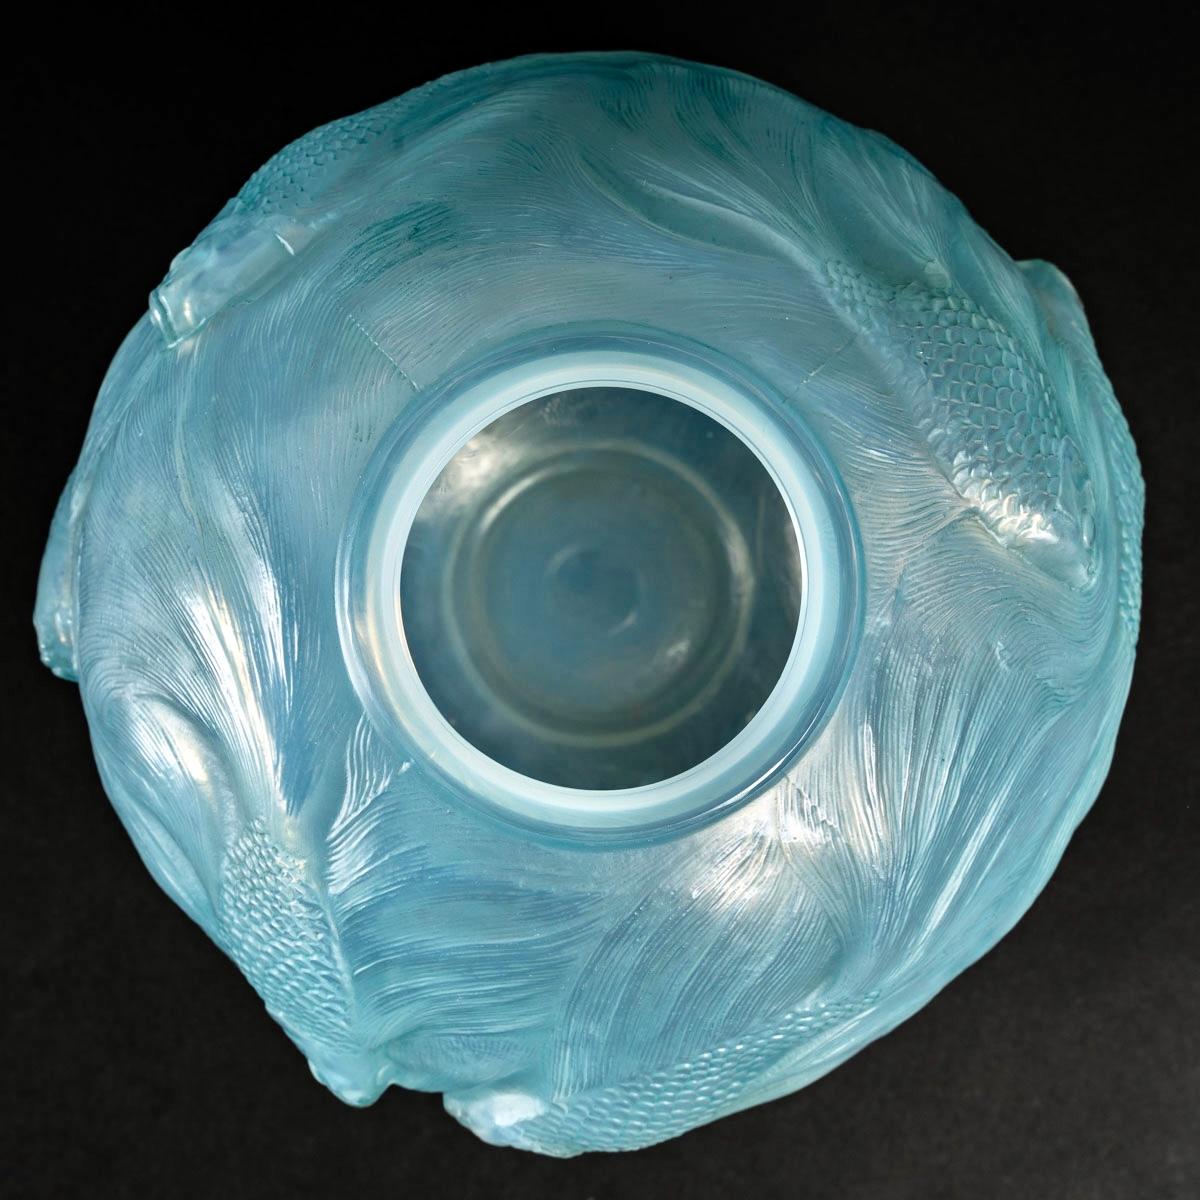 French 1924 Rene Lalique Formose Vase in Double Cased Opalescent Glass with Blue Stain